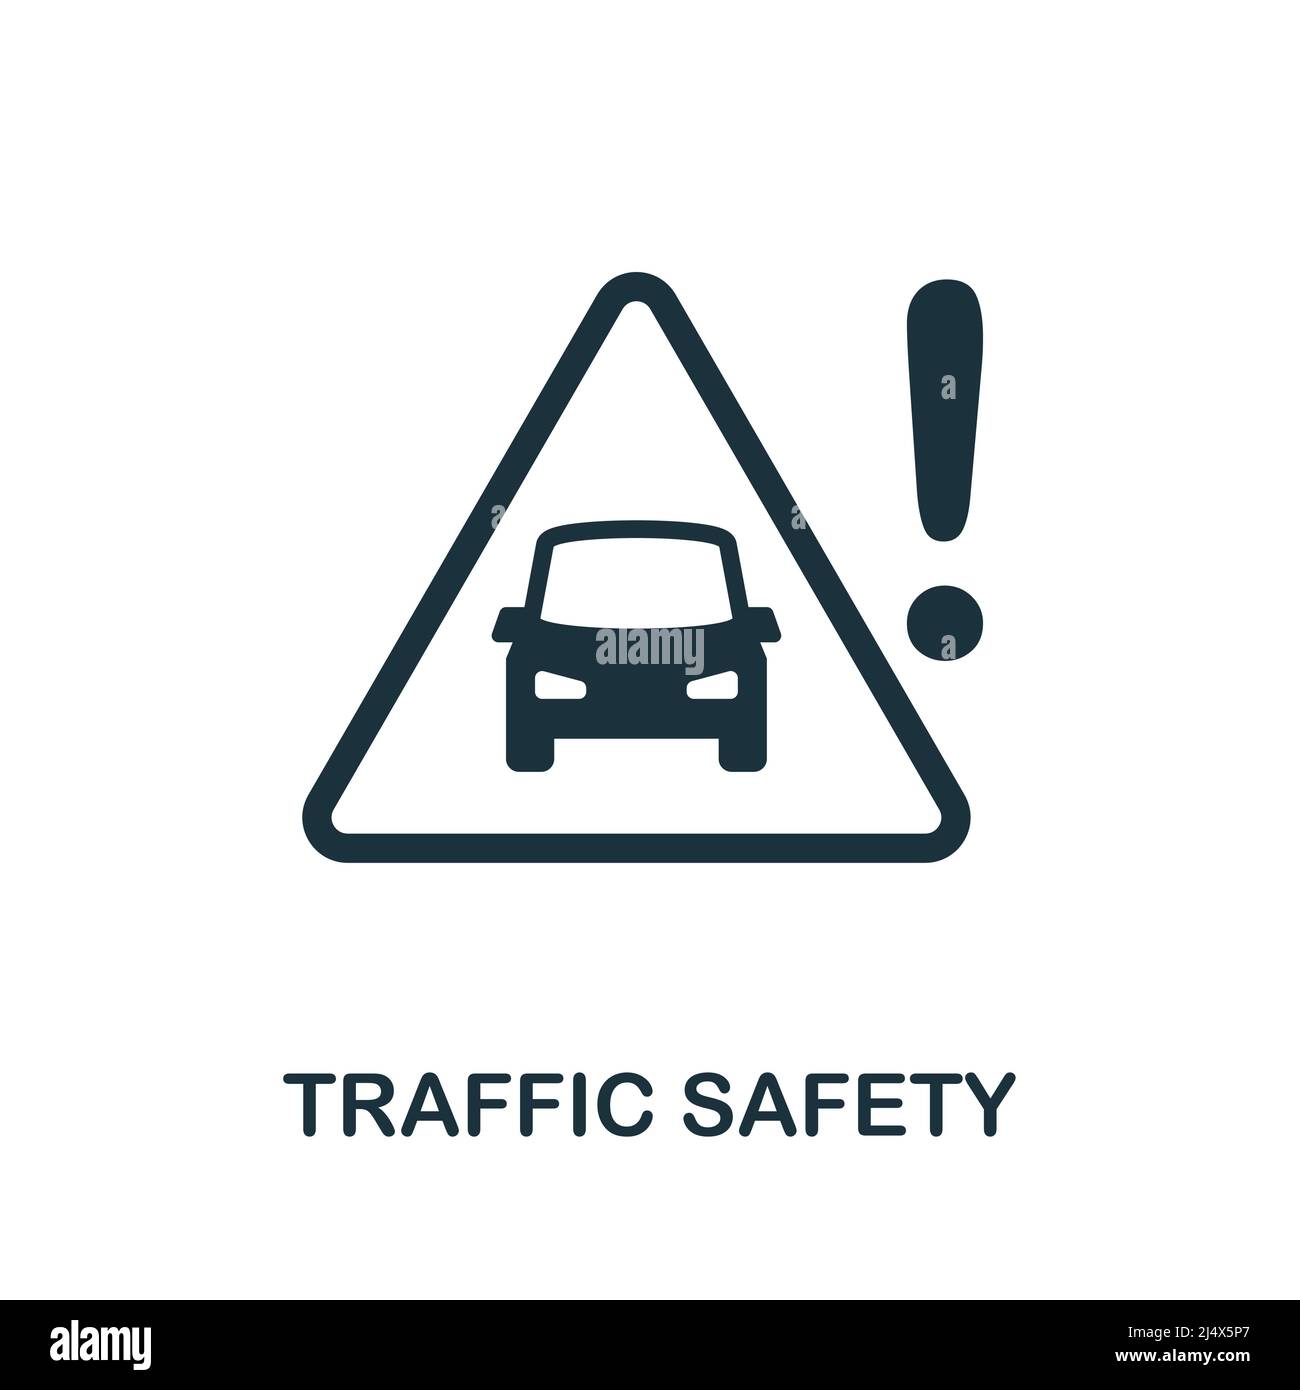 Traffic Safety icon. Monochrome simple Traffic Safety icon for templates, web design and infographics Stock Vector